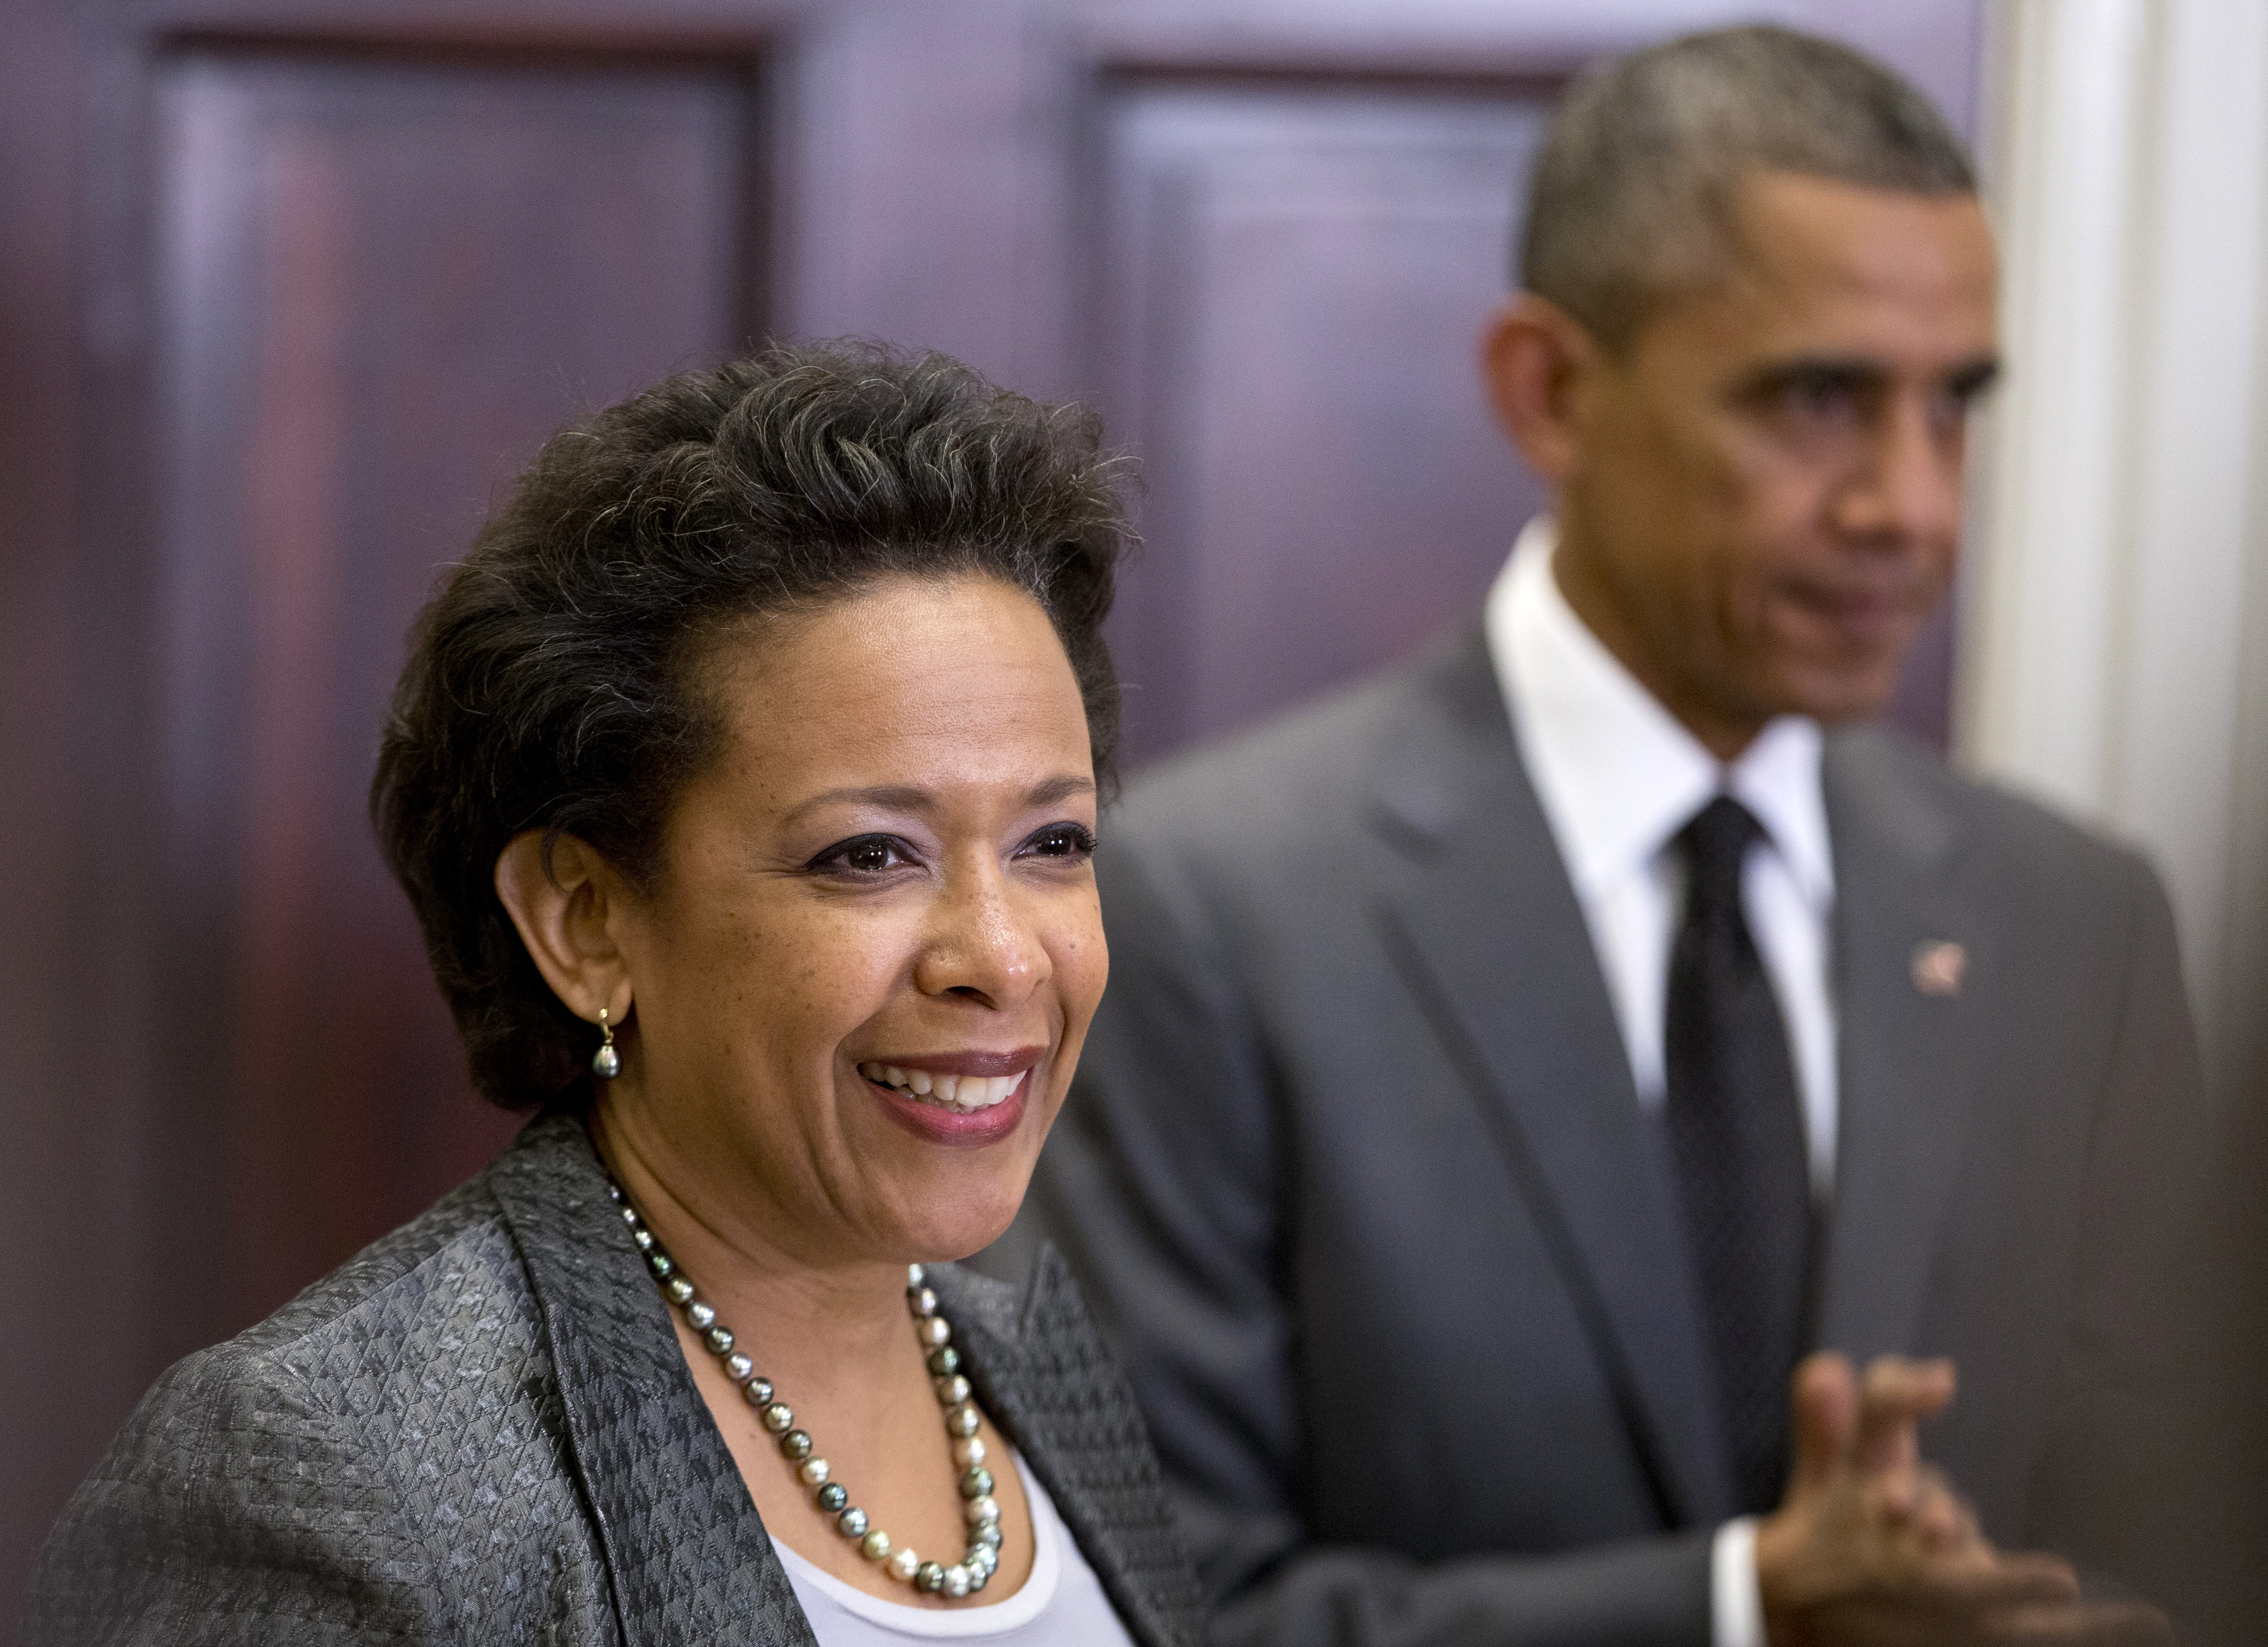 President Barack Obama listens at right as US Attorney Loretta Lynch speaks in the Roosevelt Room of the White House in Washington on Nov. 8, 2014.